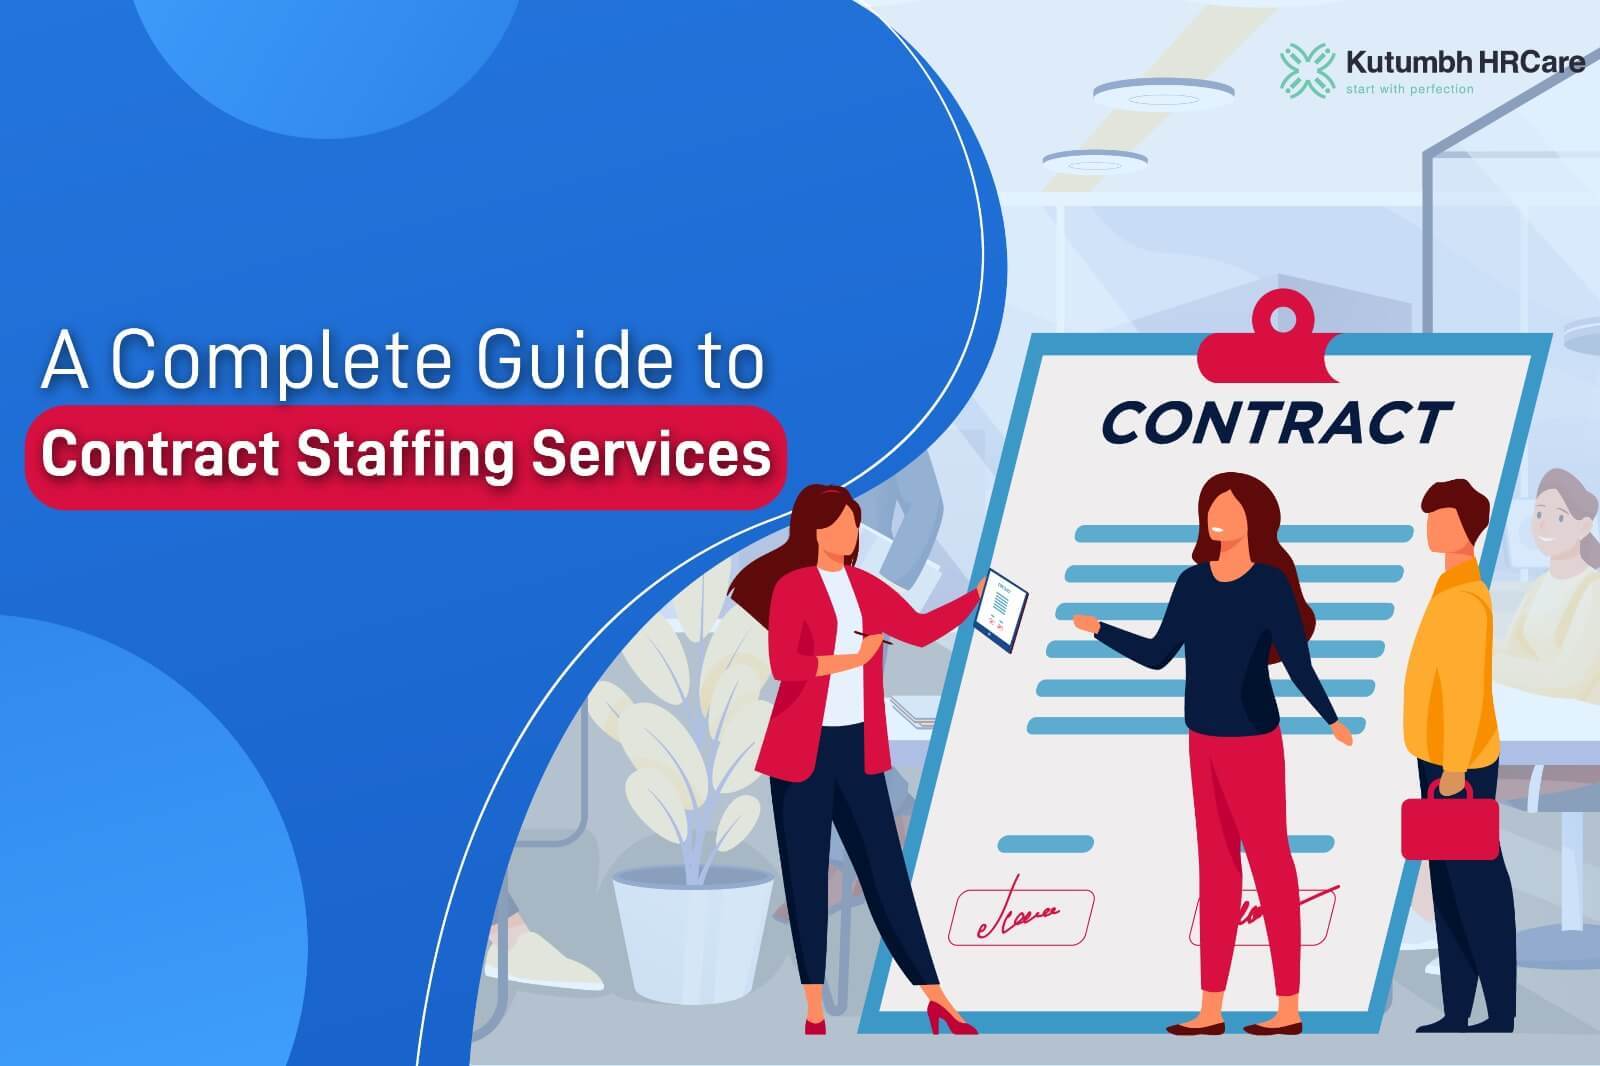 A Complete Guide to Contract Staffing Services